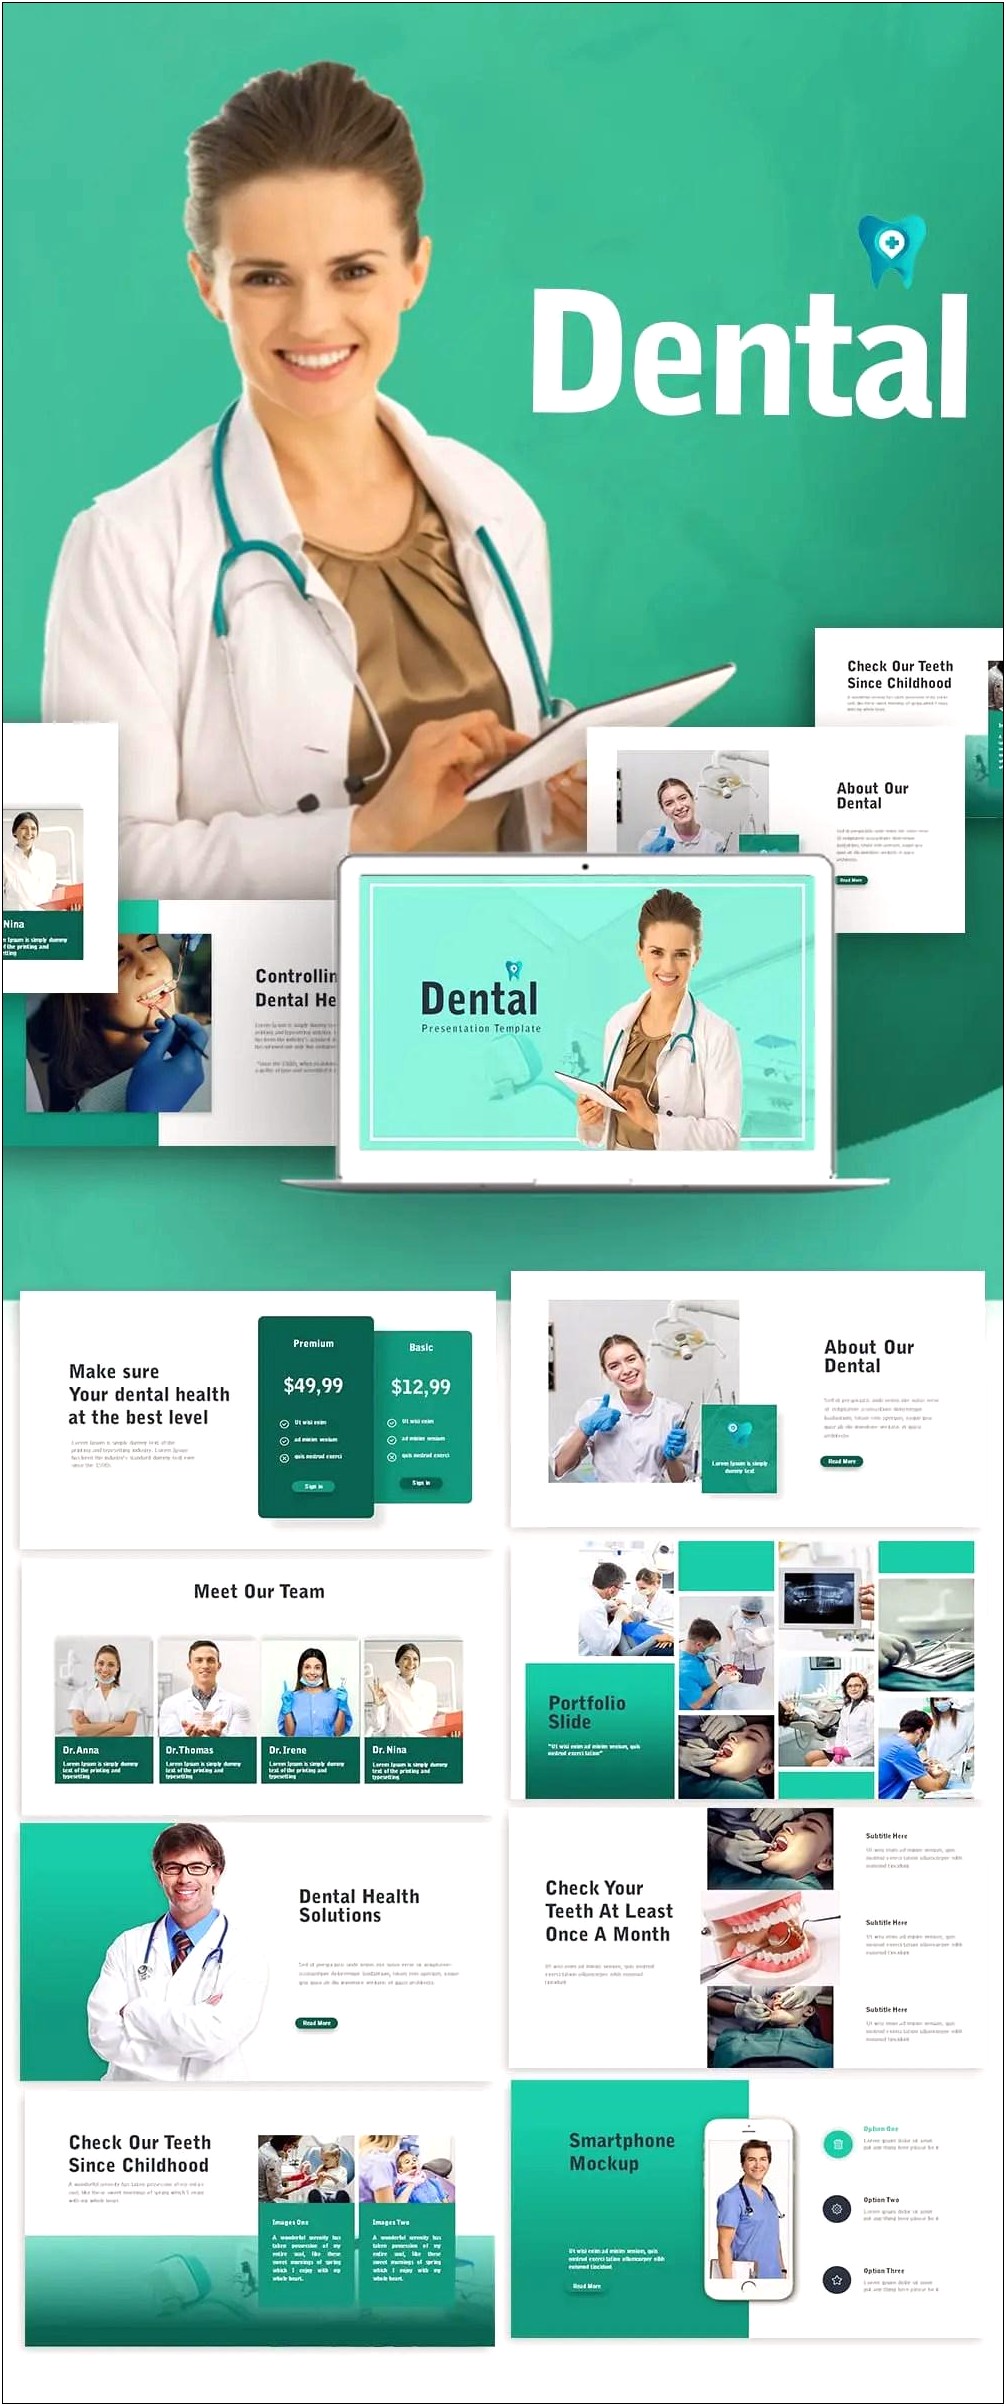 Microsoft Word Powerpoint Templates For Medical Presentations